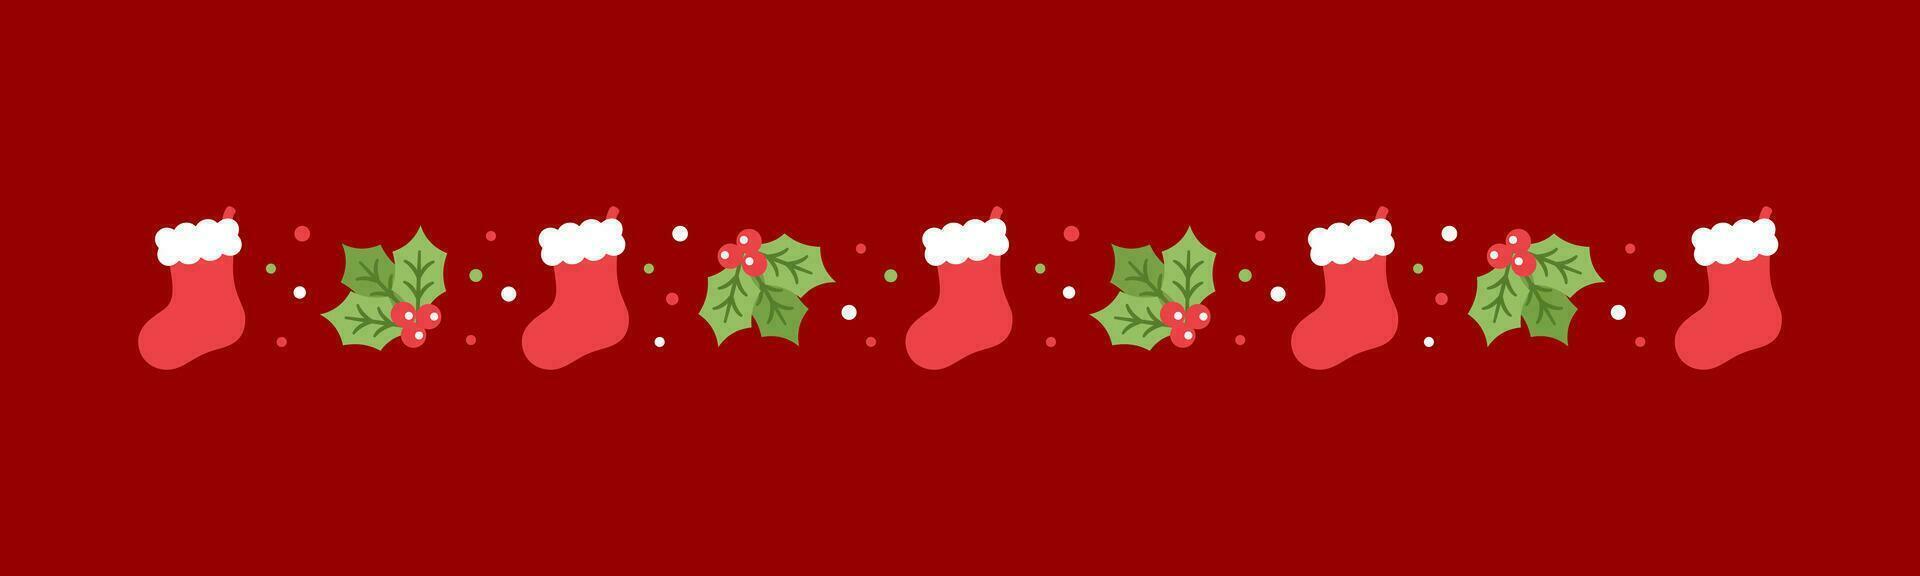 Christmas themed decorative border and text divider, Christmas Stocking and Mistletoe Pattern. Vector Illustration.